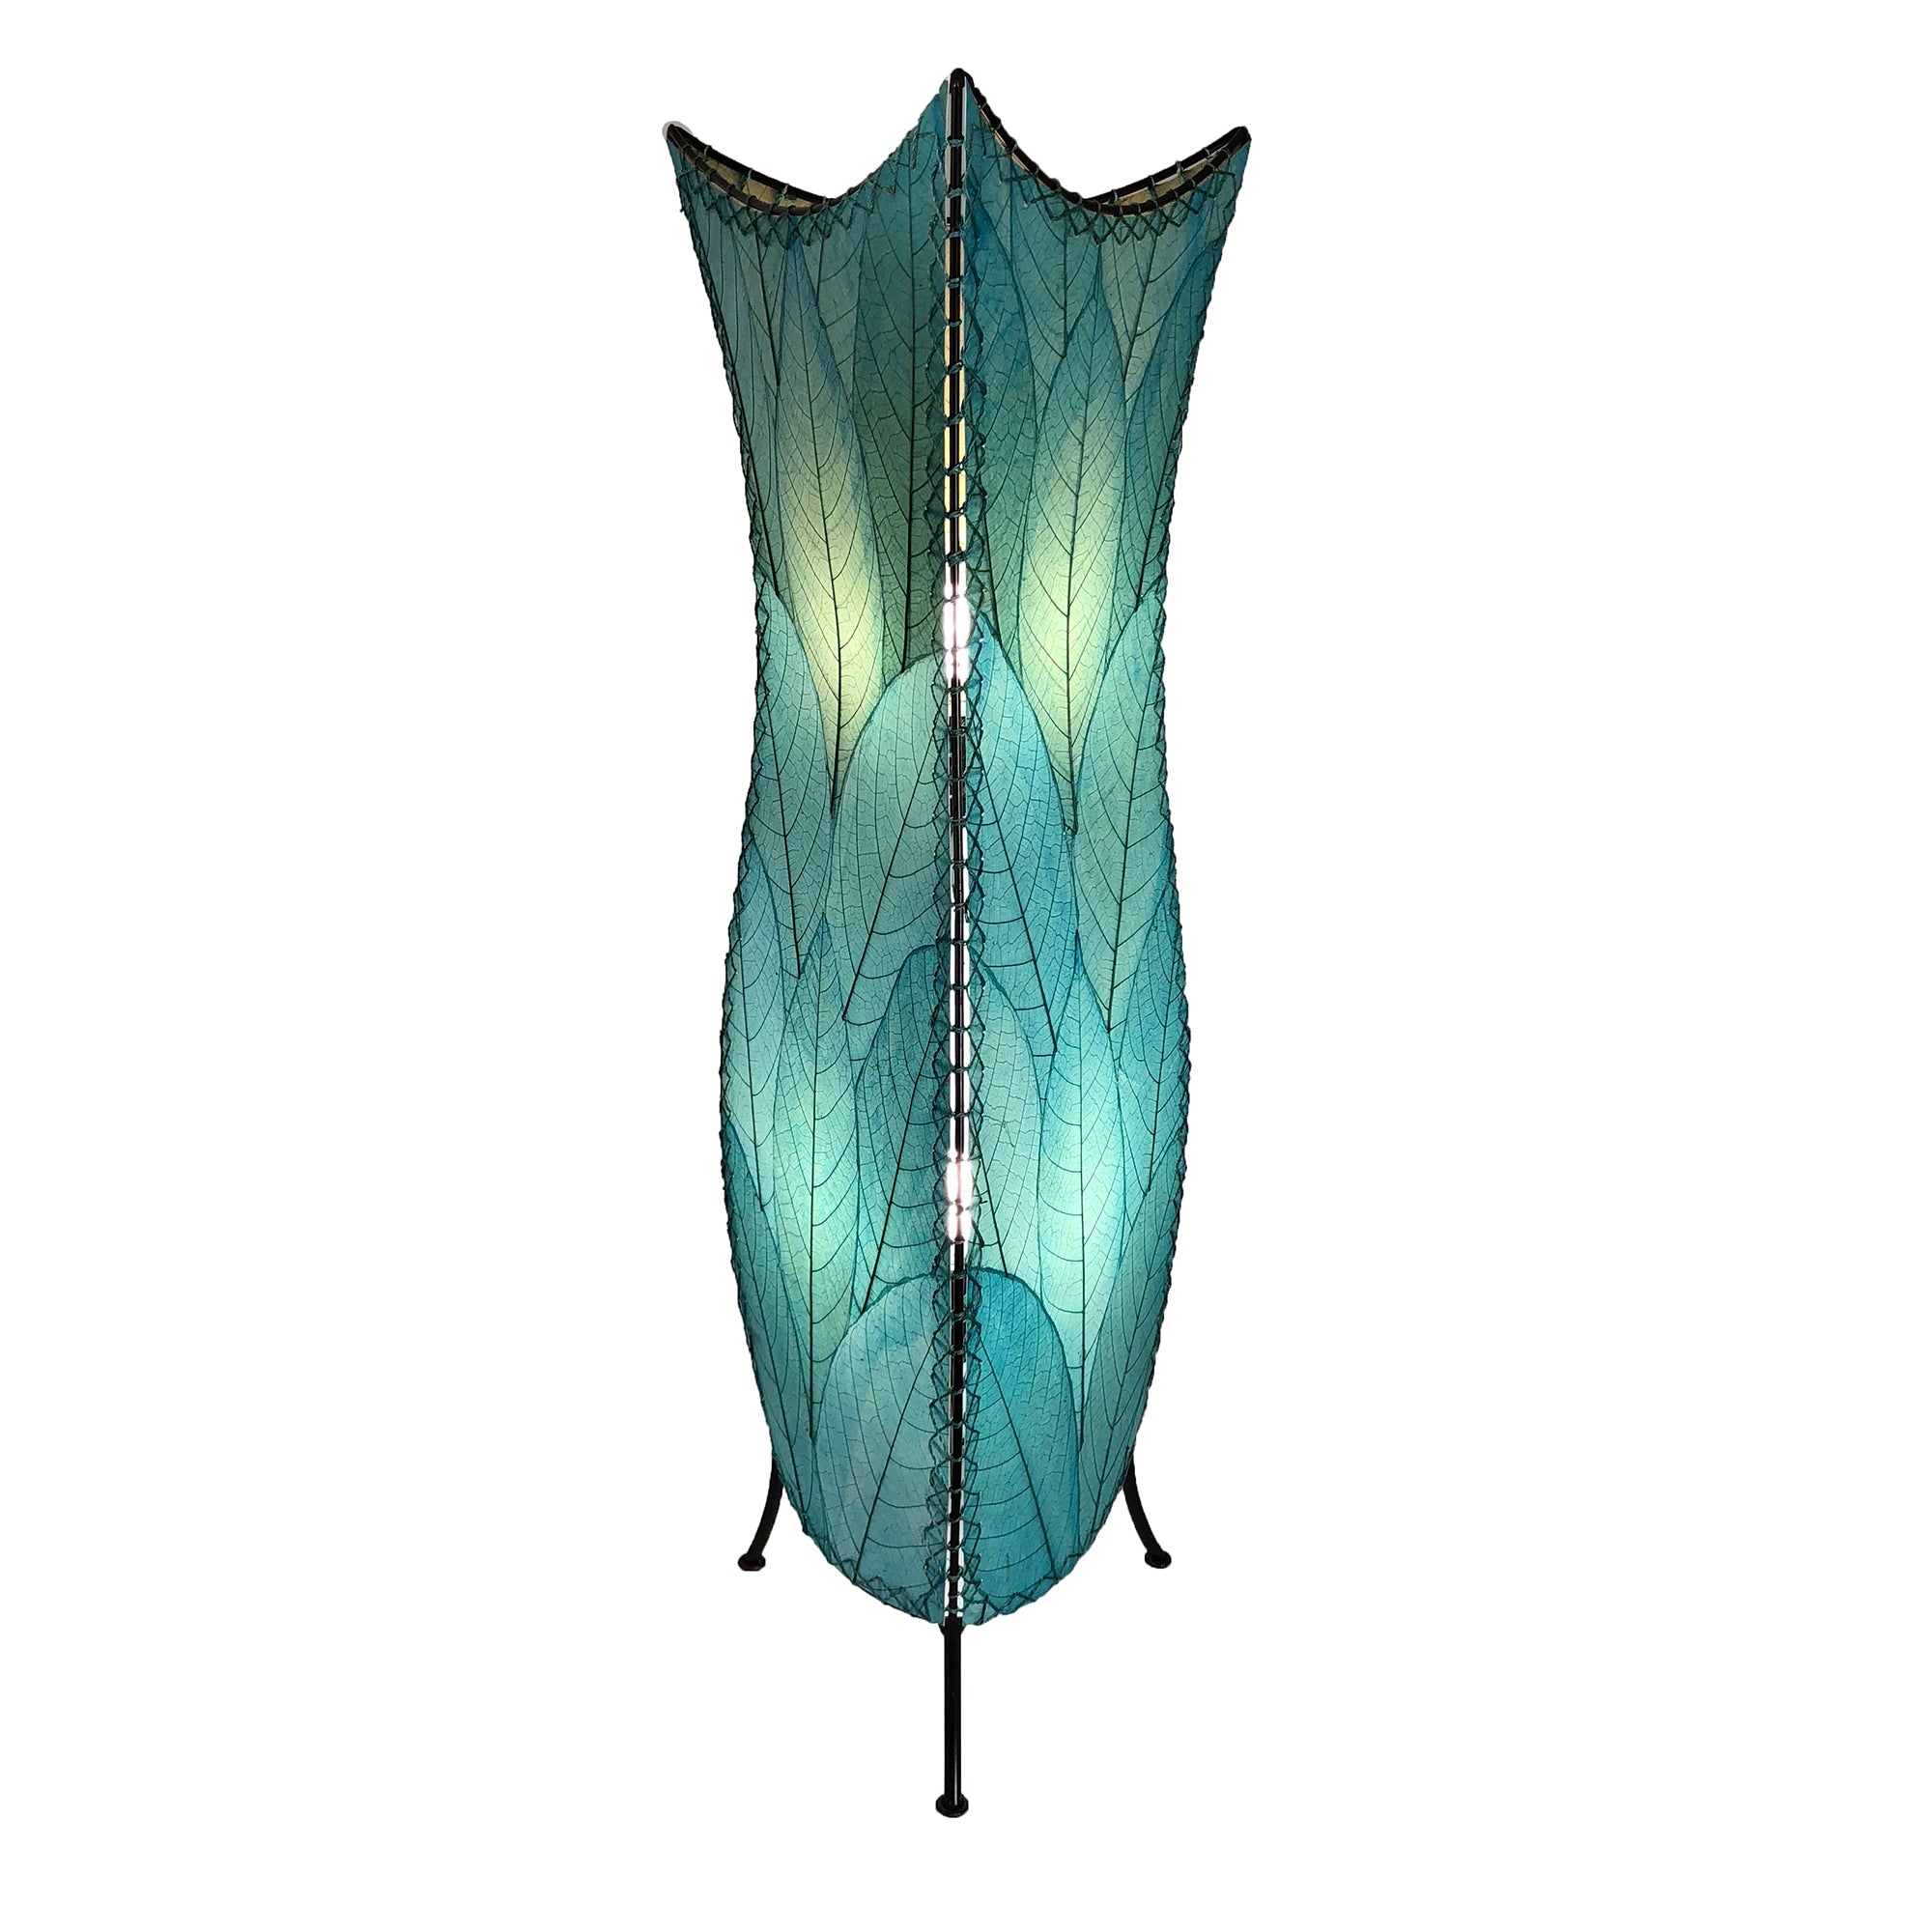 Eangee Wave Giant Lamp - The Organic Bedroom